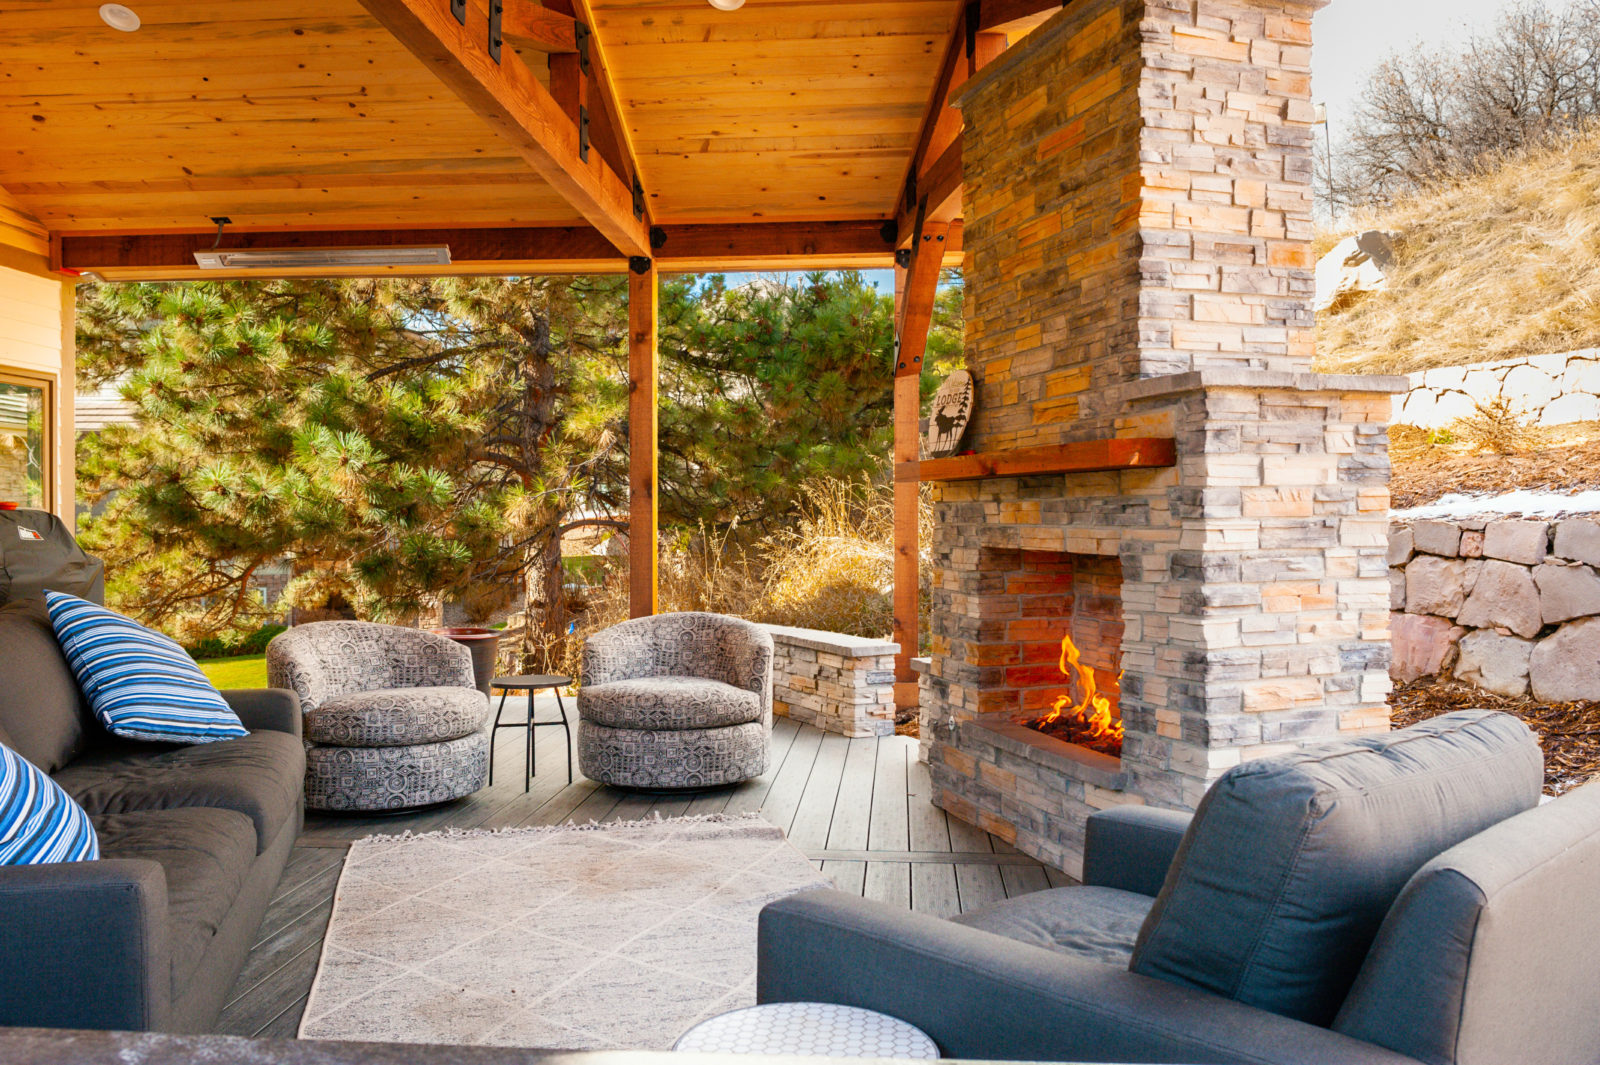 Why Does an Outdoor Fireplace Need a Chimney?